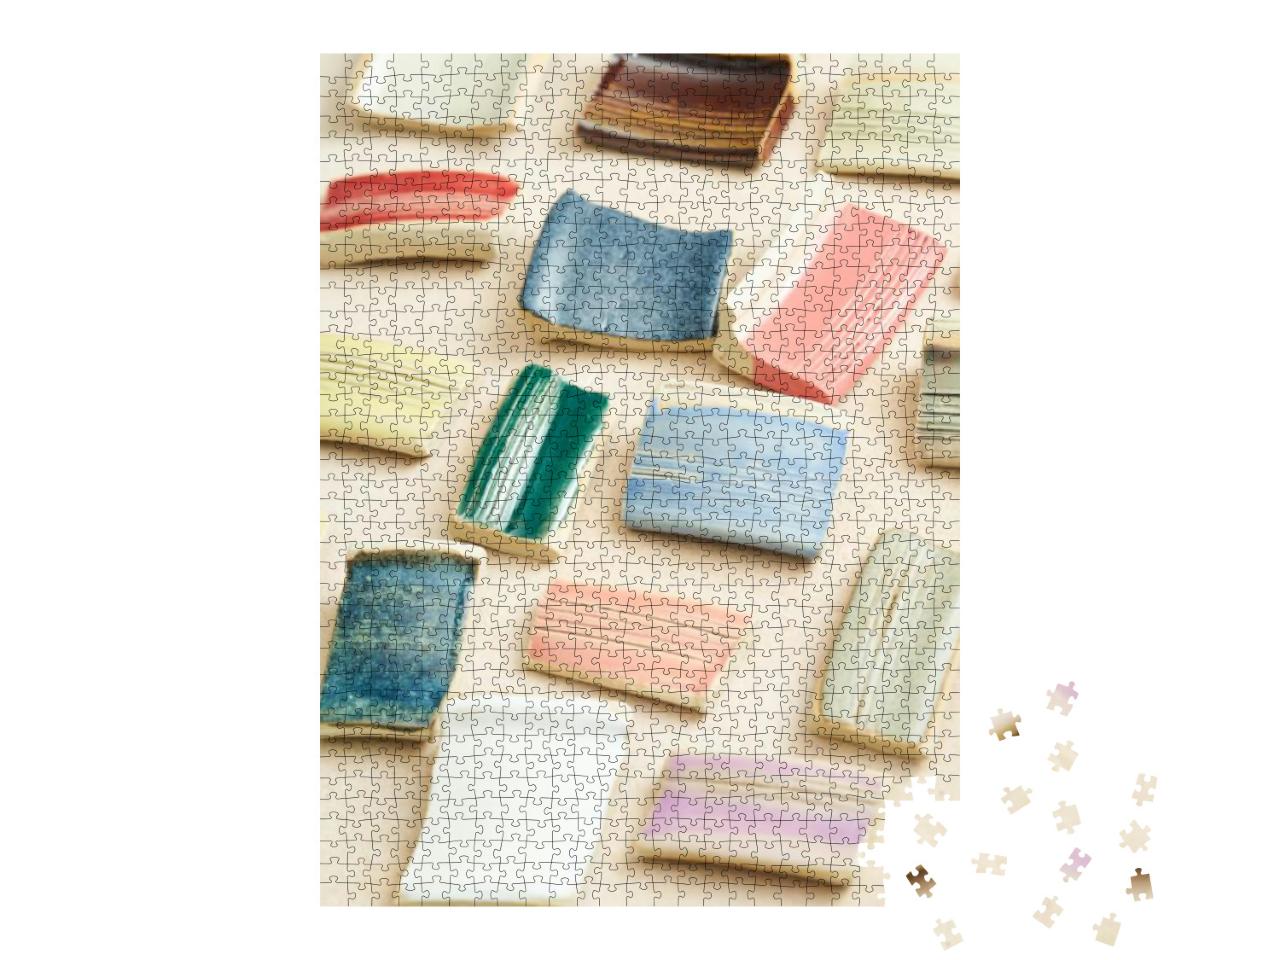 Pottery, Master Classes, Hobbies, Hand Made Texture... Jigsaw Puzzle with 1000 pieces